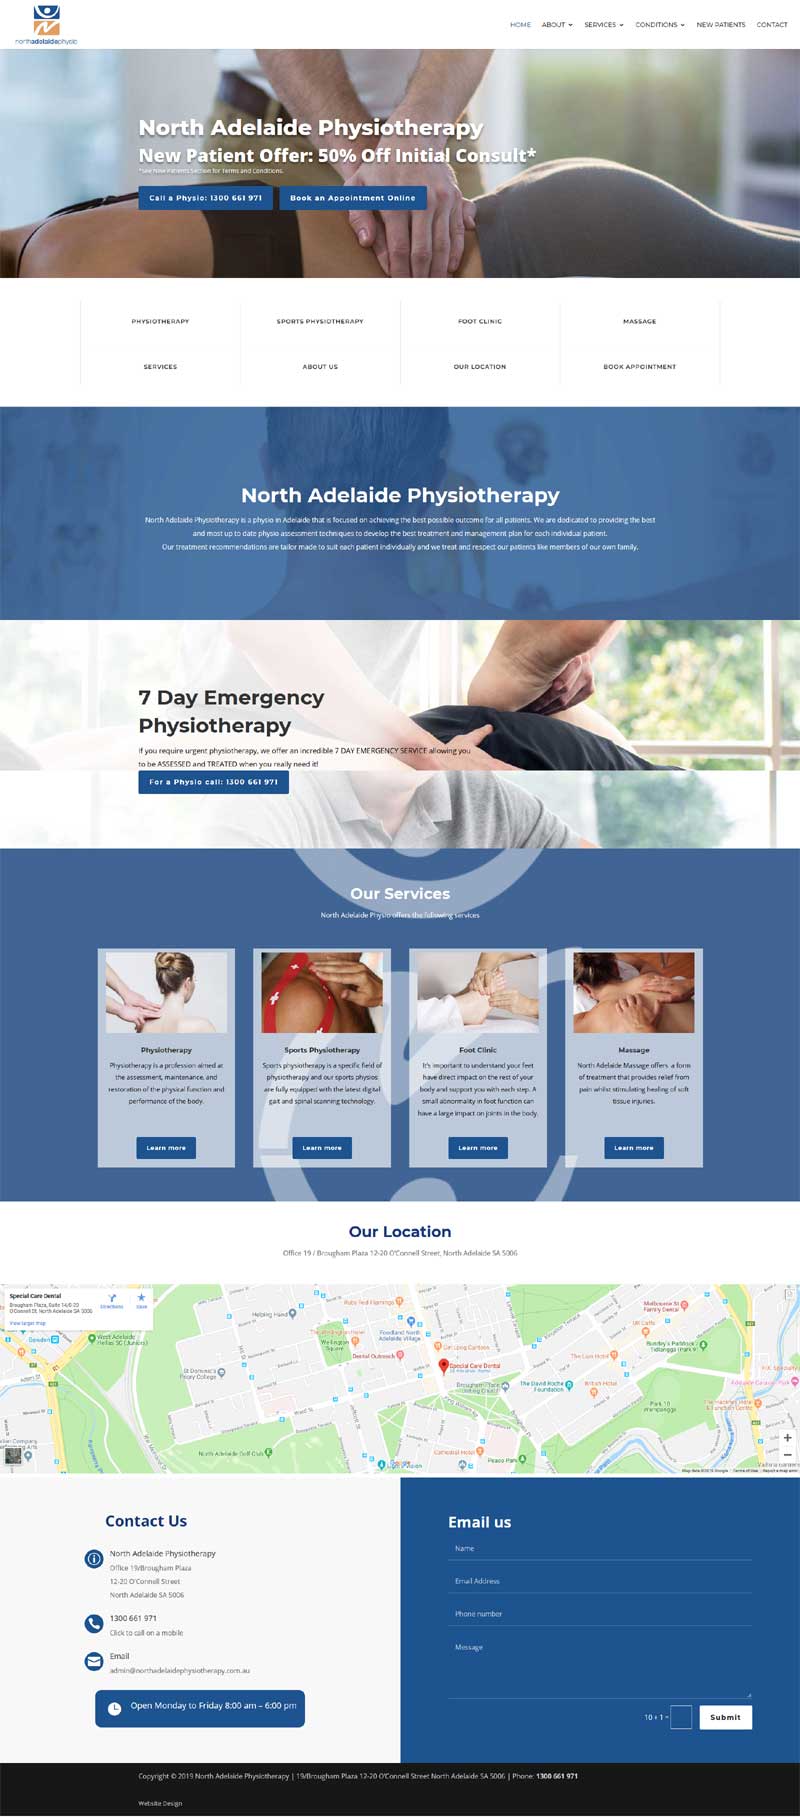 website design for North Adelaide Physiotherapy